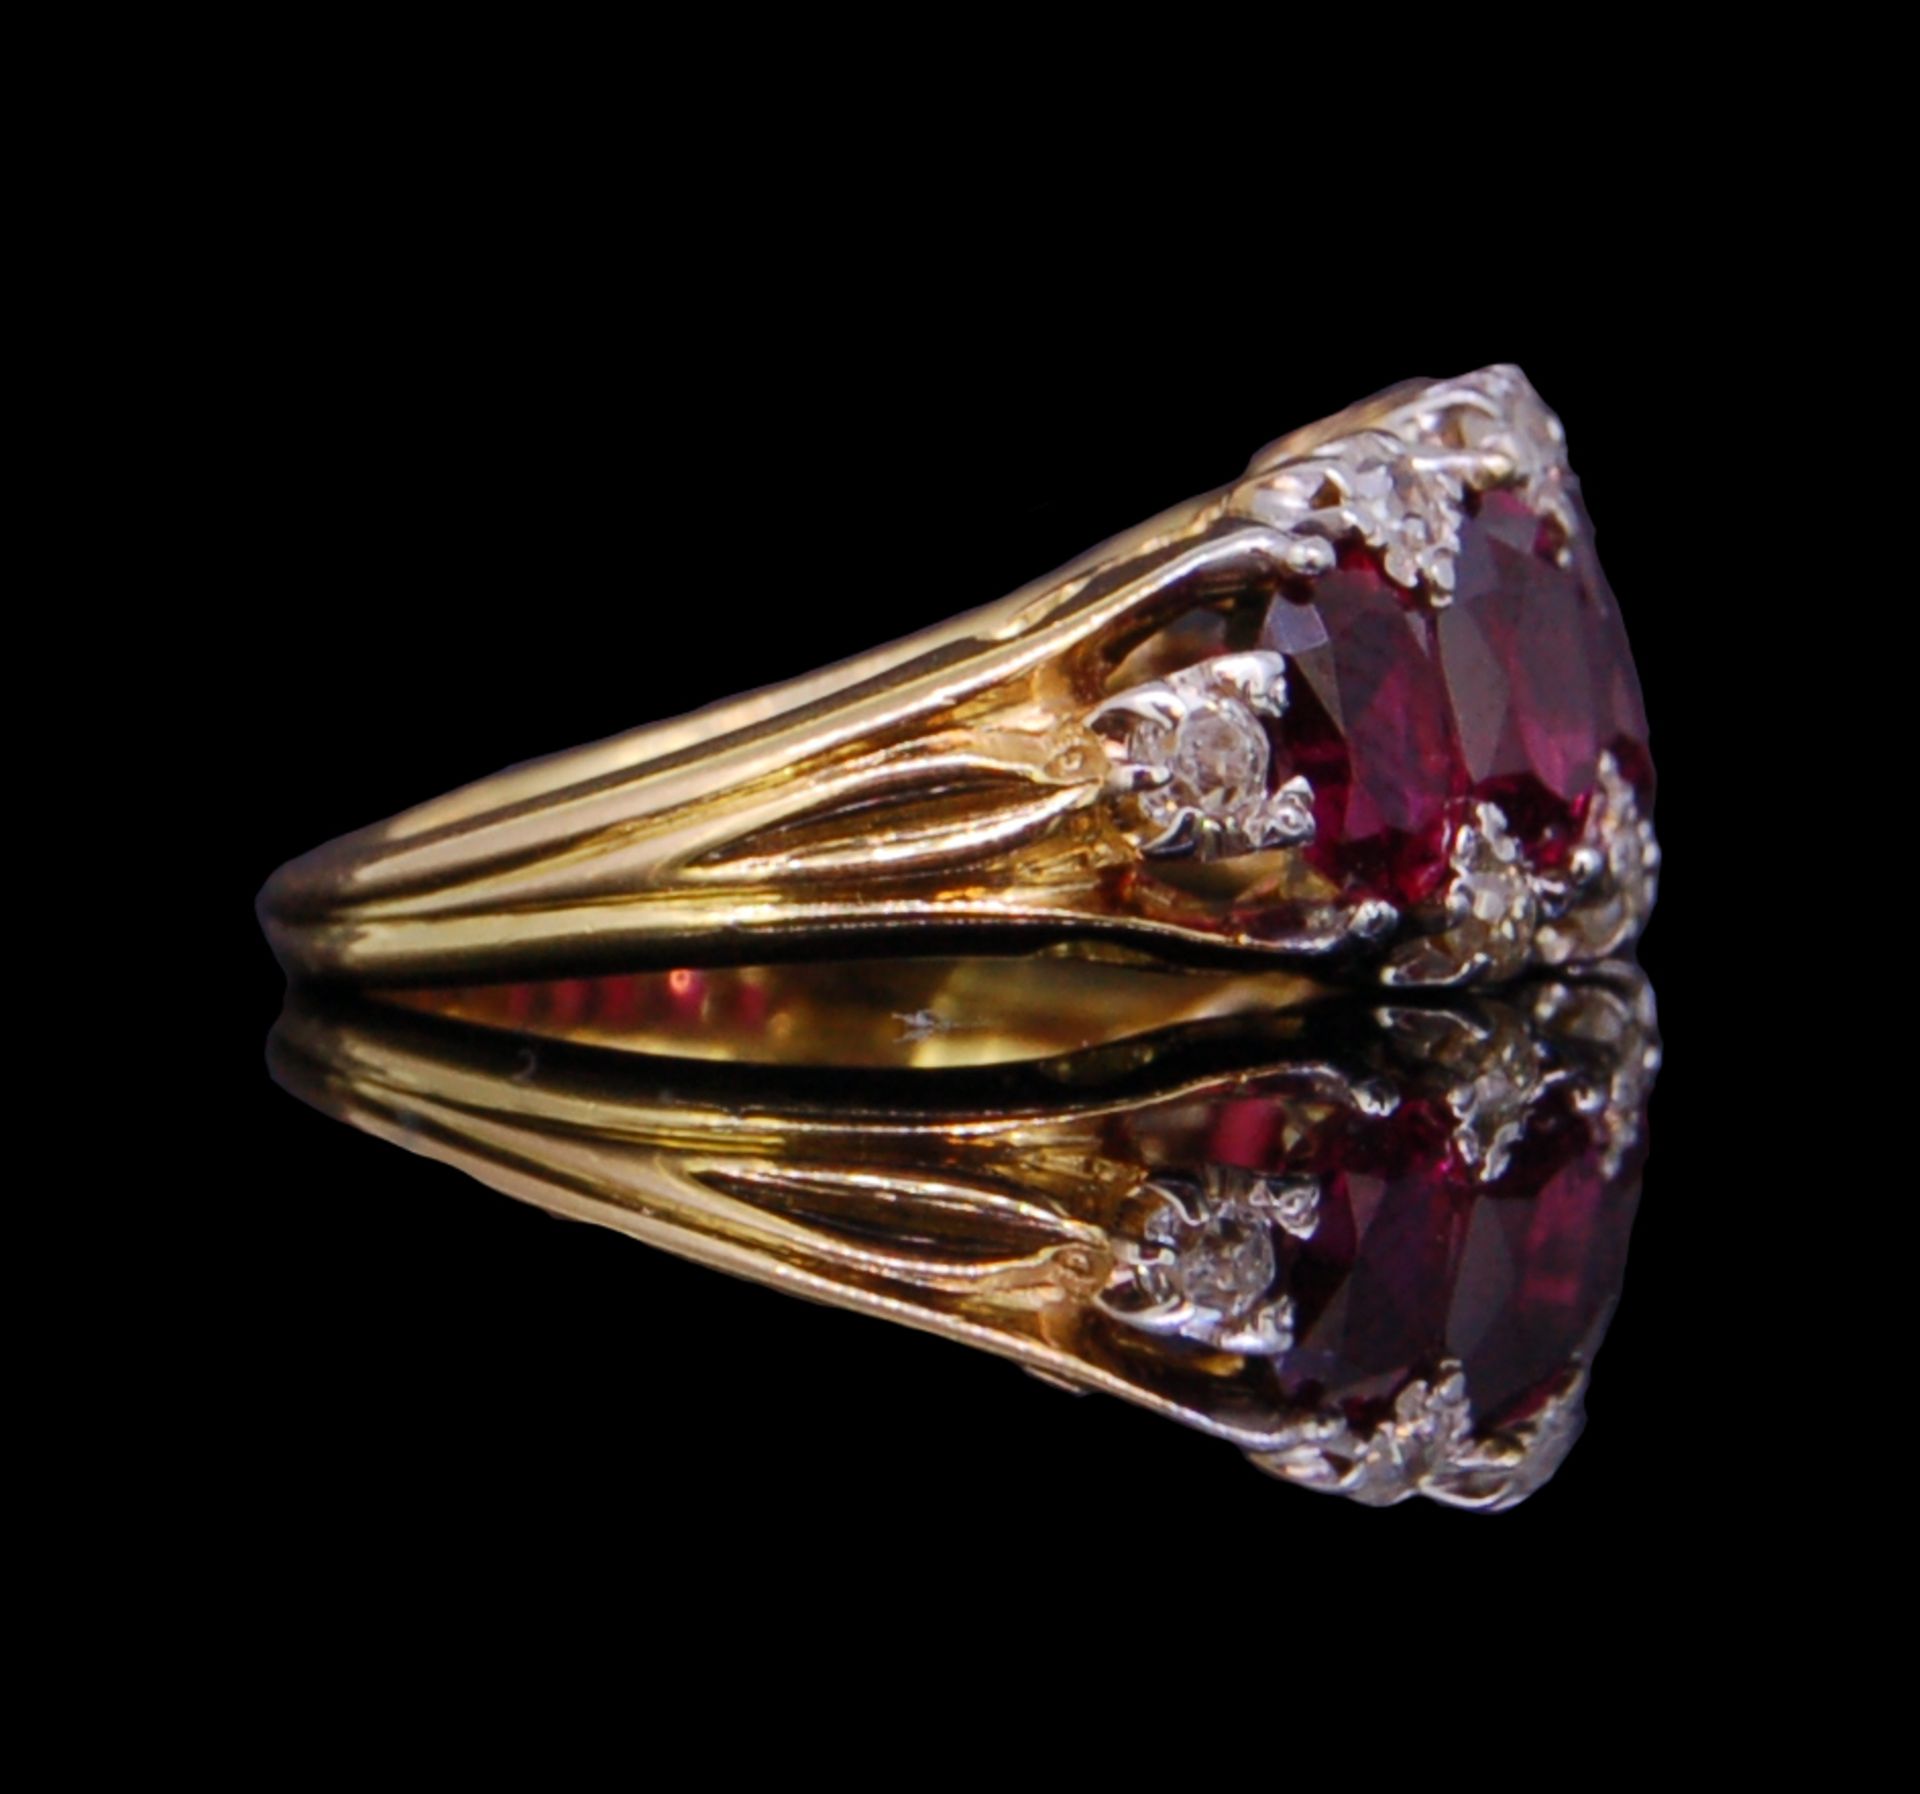 ANTIQUE FIVE STONE RUBY RING WITH DIAMOND POINTS - Image 3 of 3